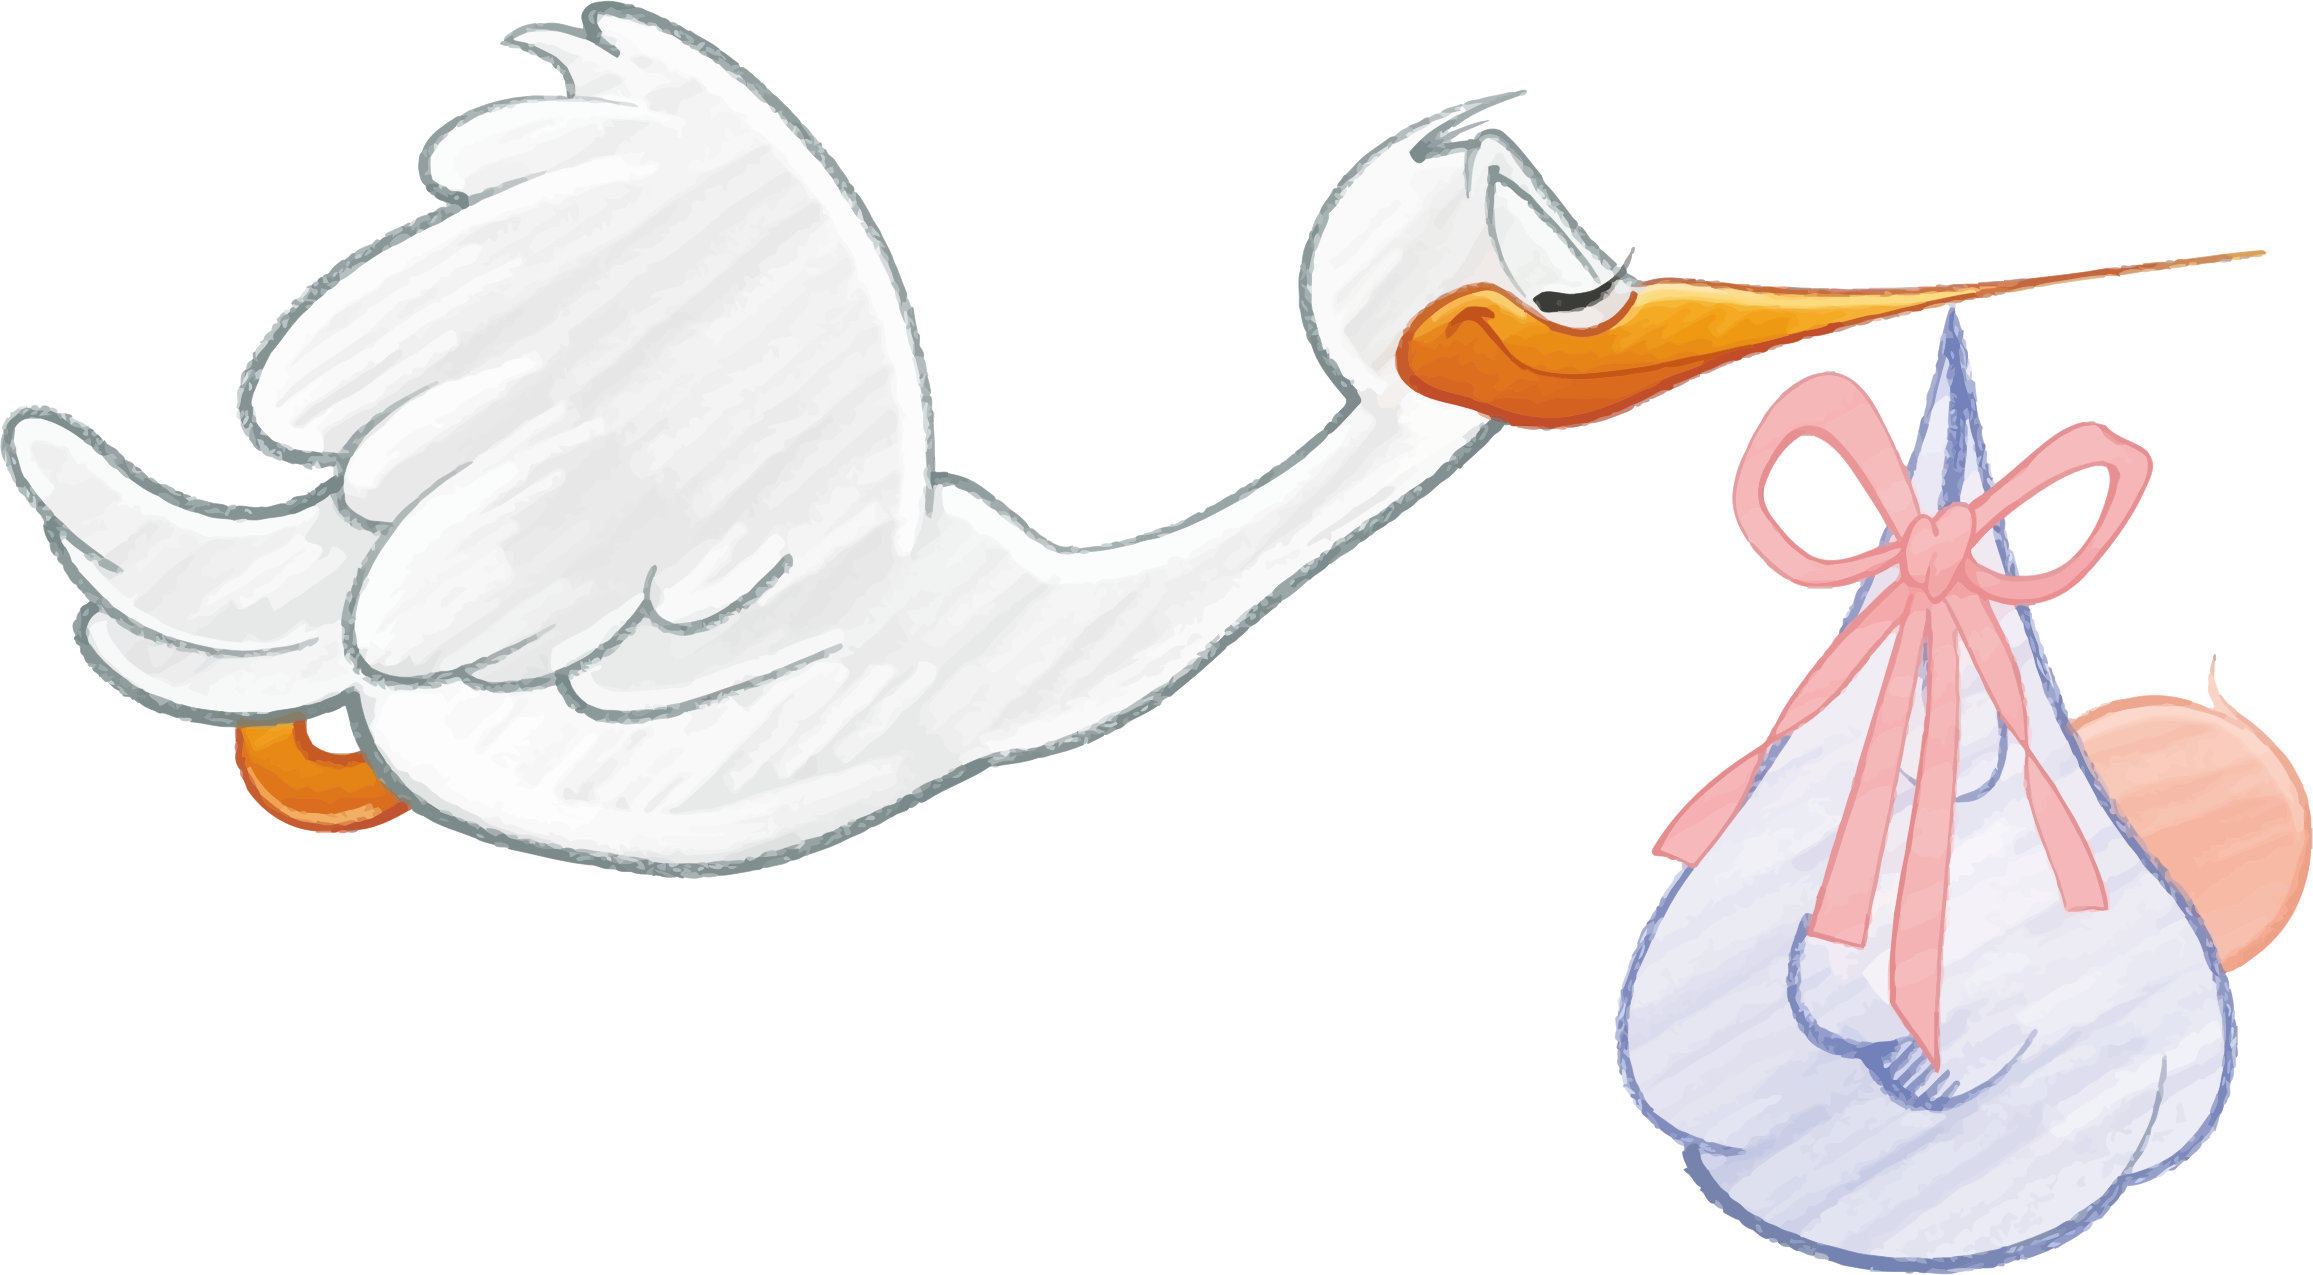 Carrying Baby Girl - Stork In Hat Carrying Baby (2313x1275)